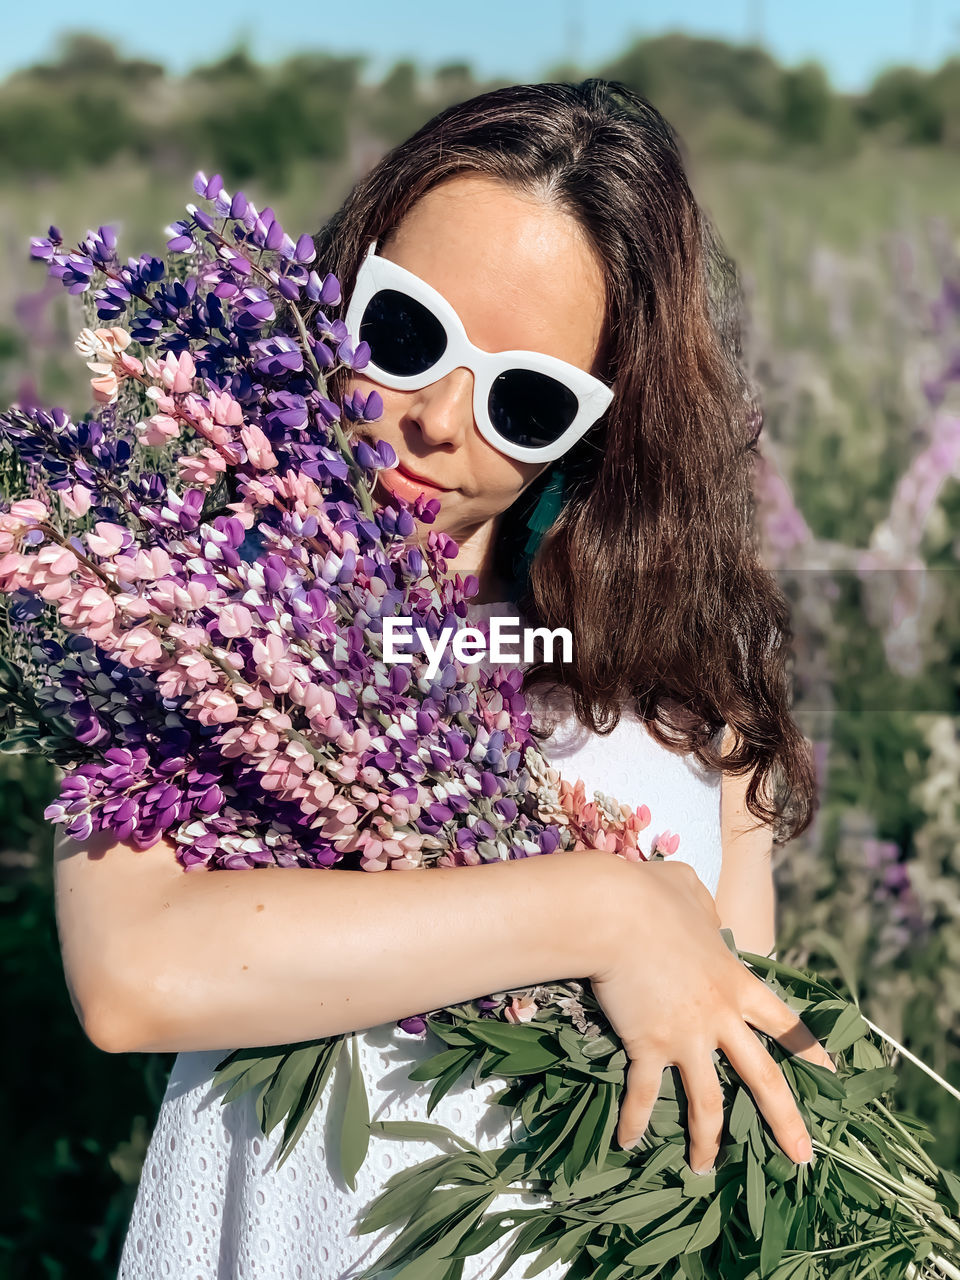 Low angle view of woman wearing sunglasses against pink flowering plants